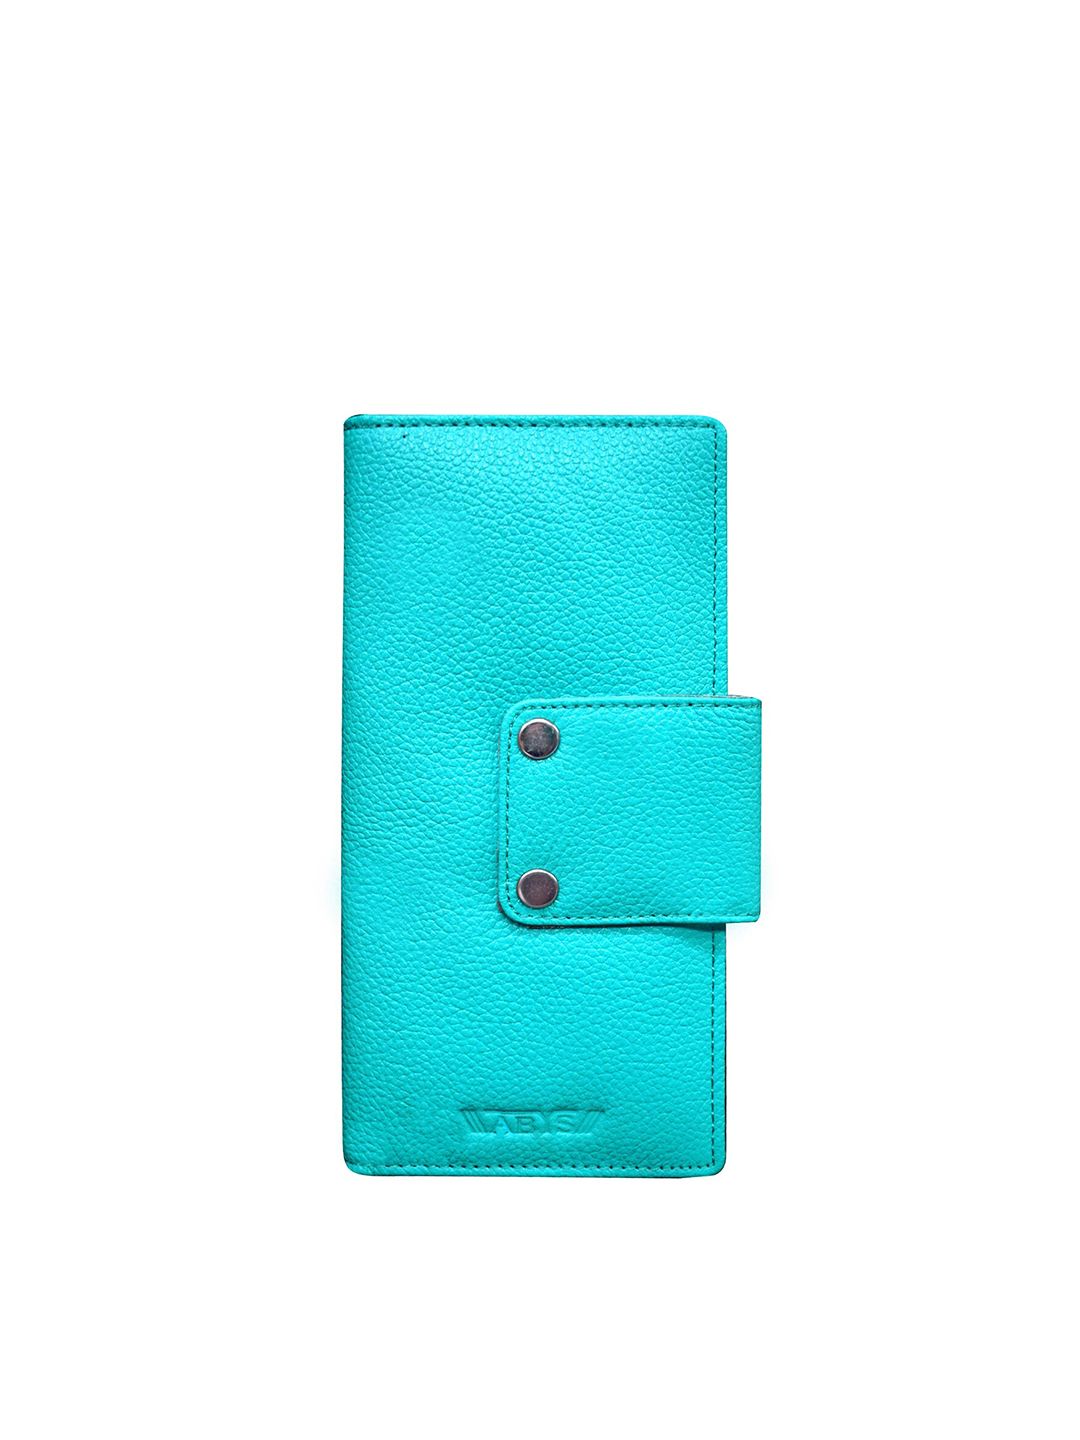 ABYS Unisex Teal & Silver-Toned Textured Leather Two Fold Wallet Price in India